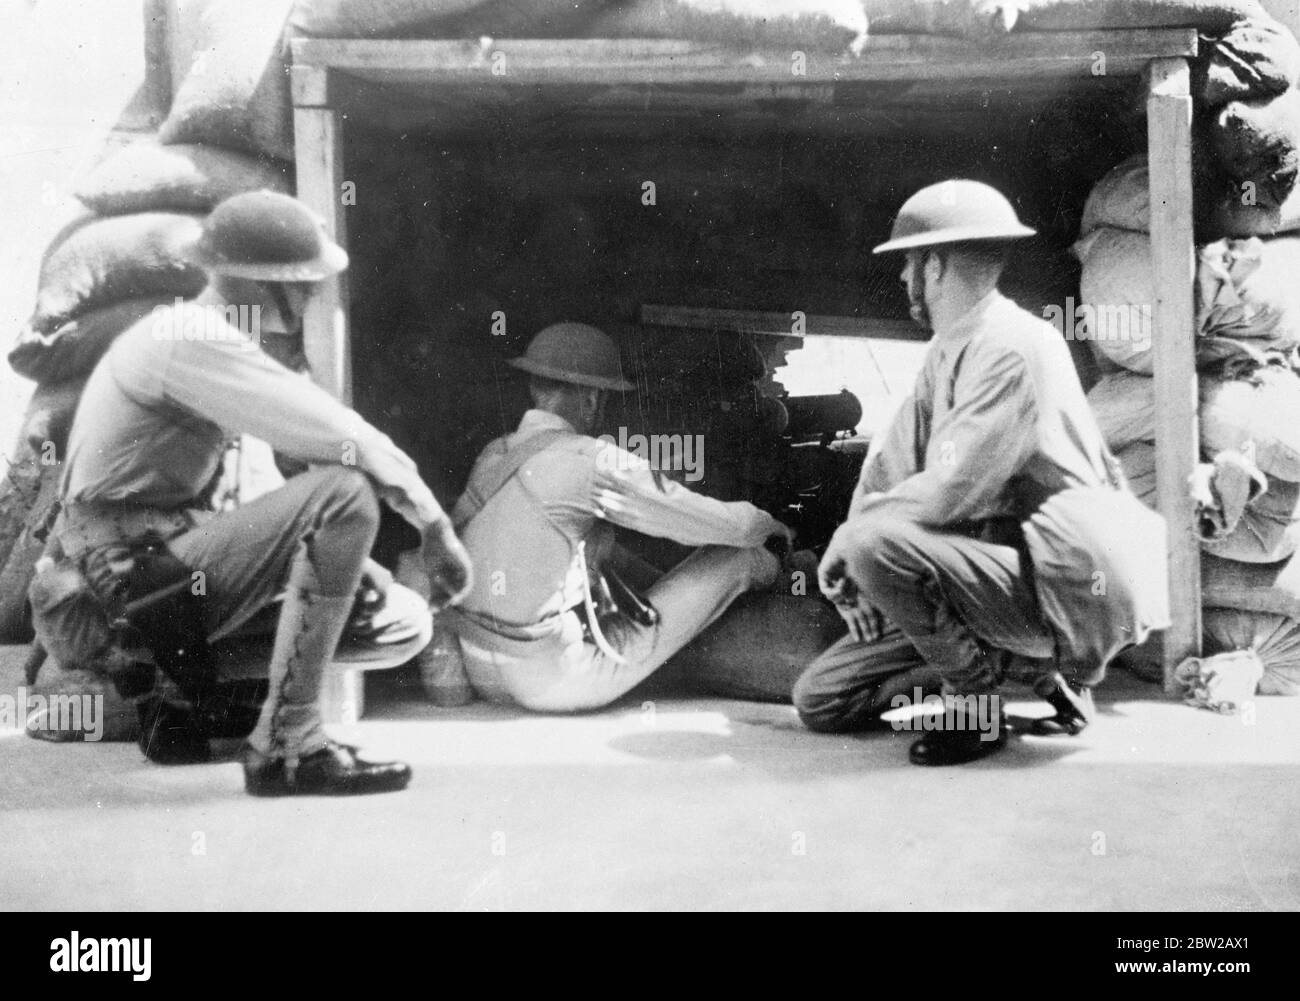 Machine gunners keep vigil on Shanghai's international settlement. Prices with Japan threatens. These pictures are just been received from Shanghai, where a serious situation has been brought about by the action of the Japanese commander of imposing his control upon the customs. Great Britain, America and France are taking concerted action to protect the interests, and have 'warned' Japan. Photo shows, American marines on the alert as they man a machine gun post in the international settlement, Shanghai. 28 November 1937 Stock Photo